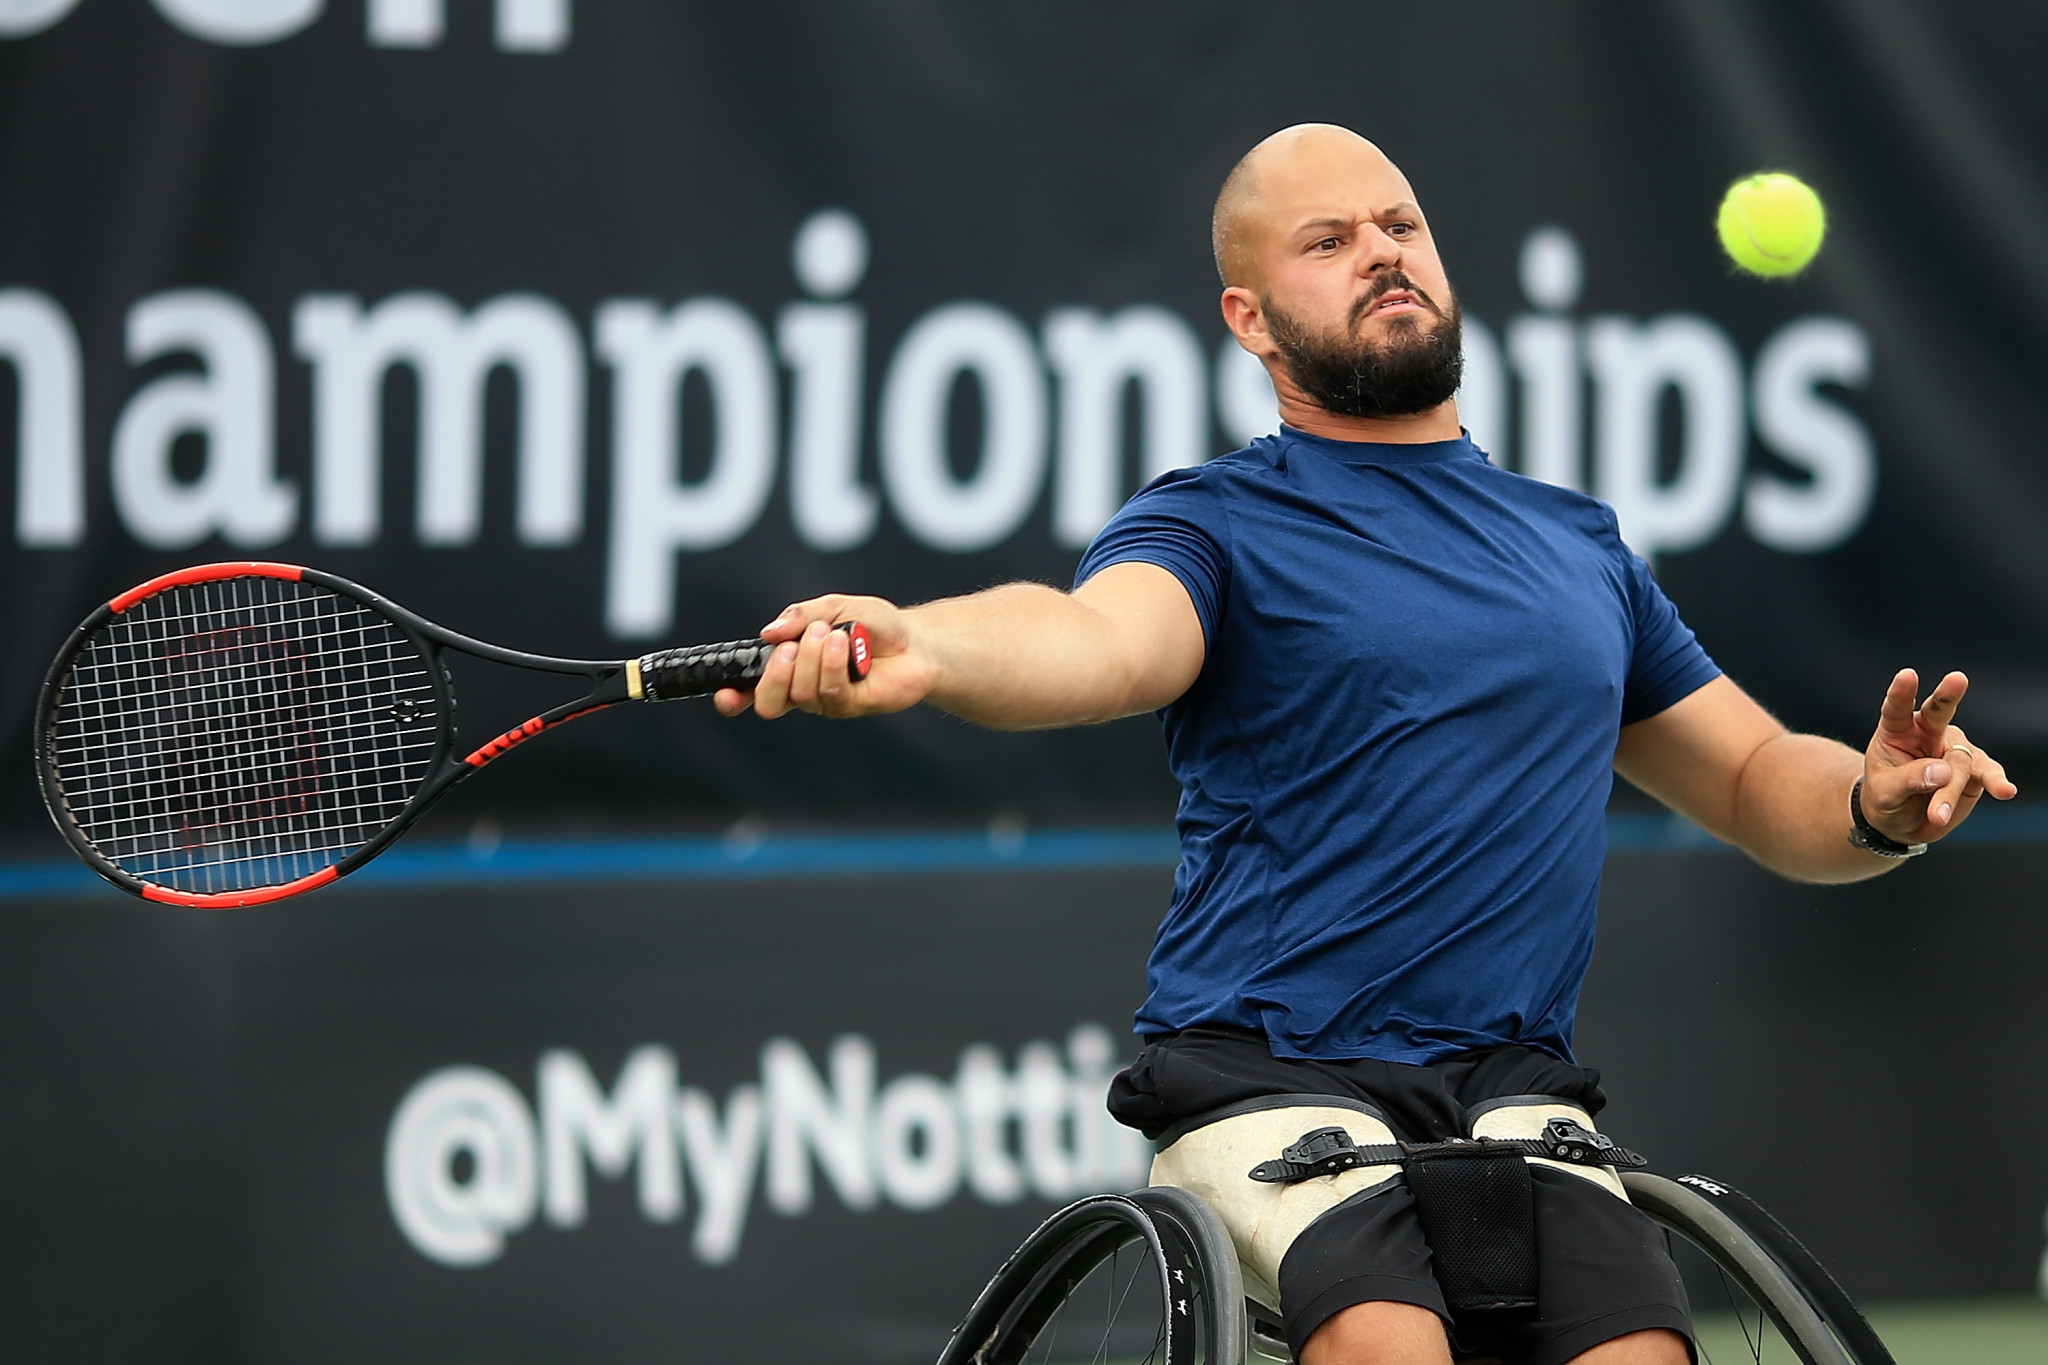 Wimbledon Wheelchair Tennis singles champion Stefan Olsson has cruised into the quarter-finals at the ITF Belgian Open ©Getty Images